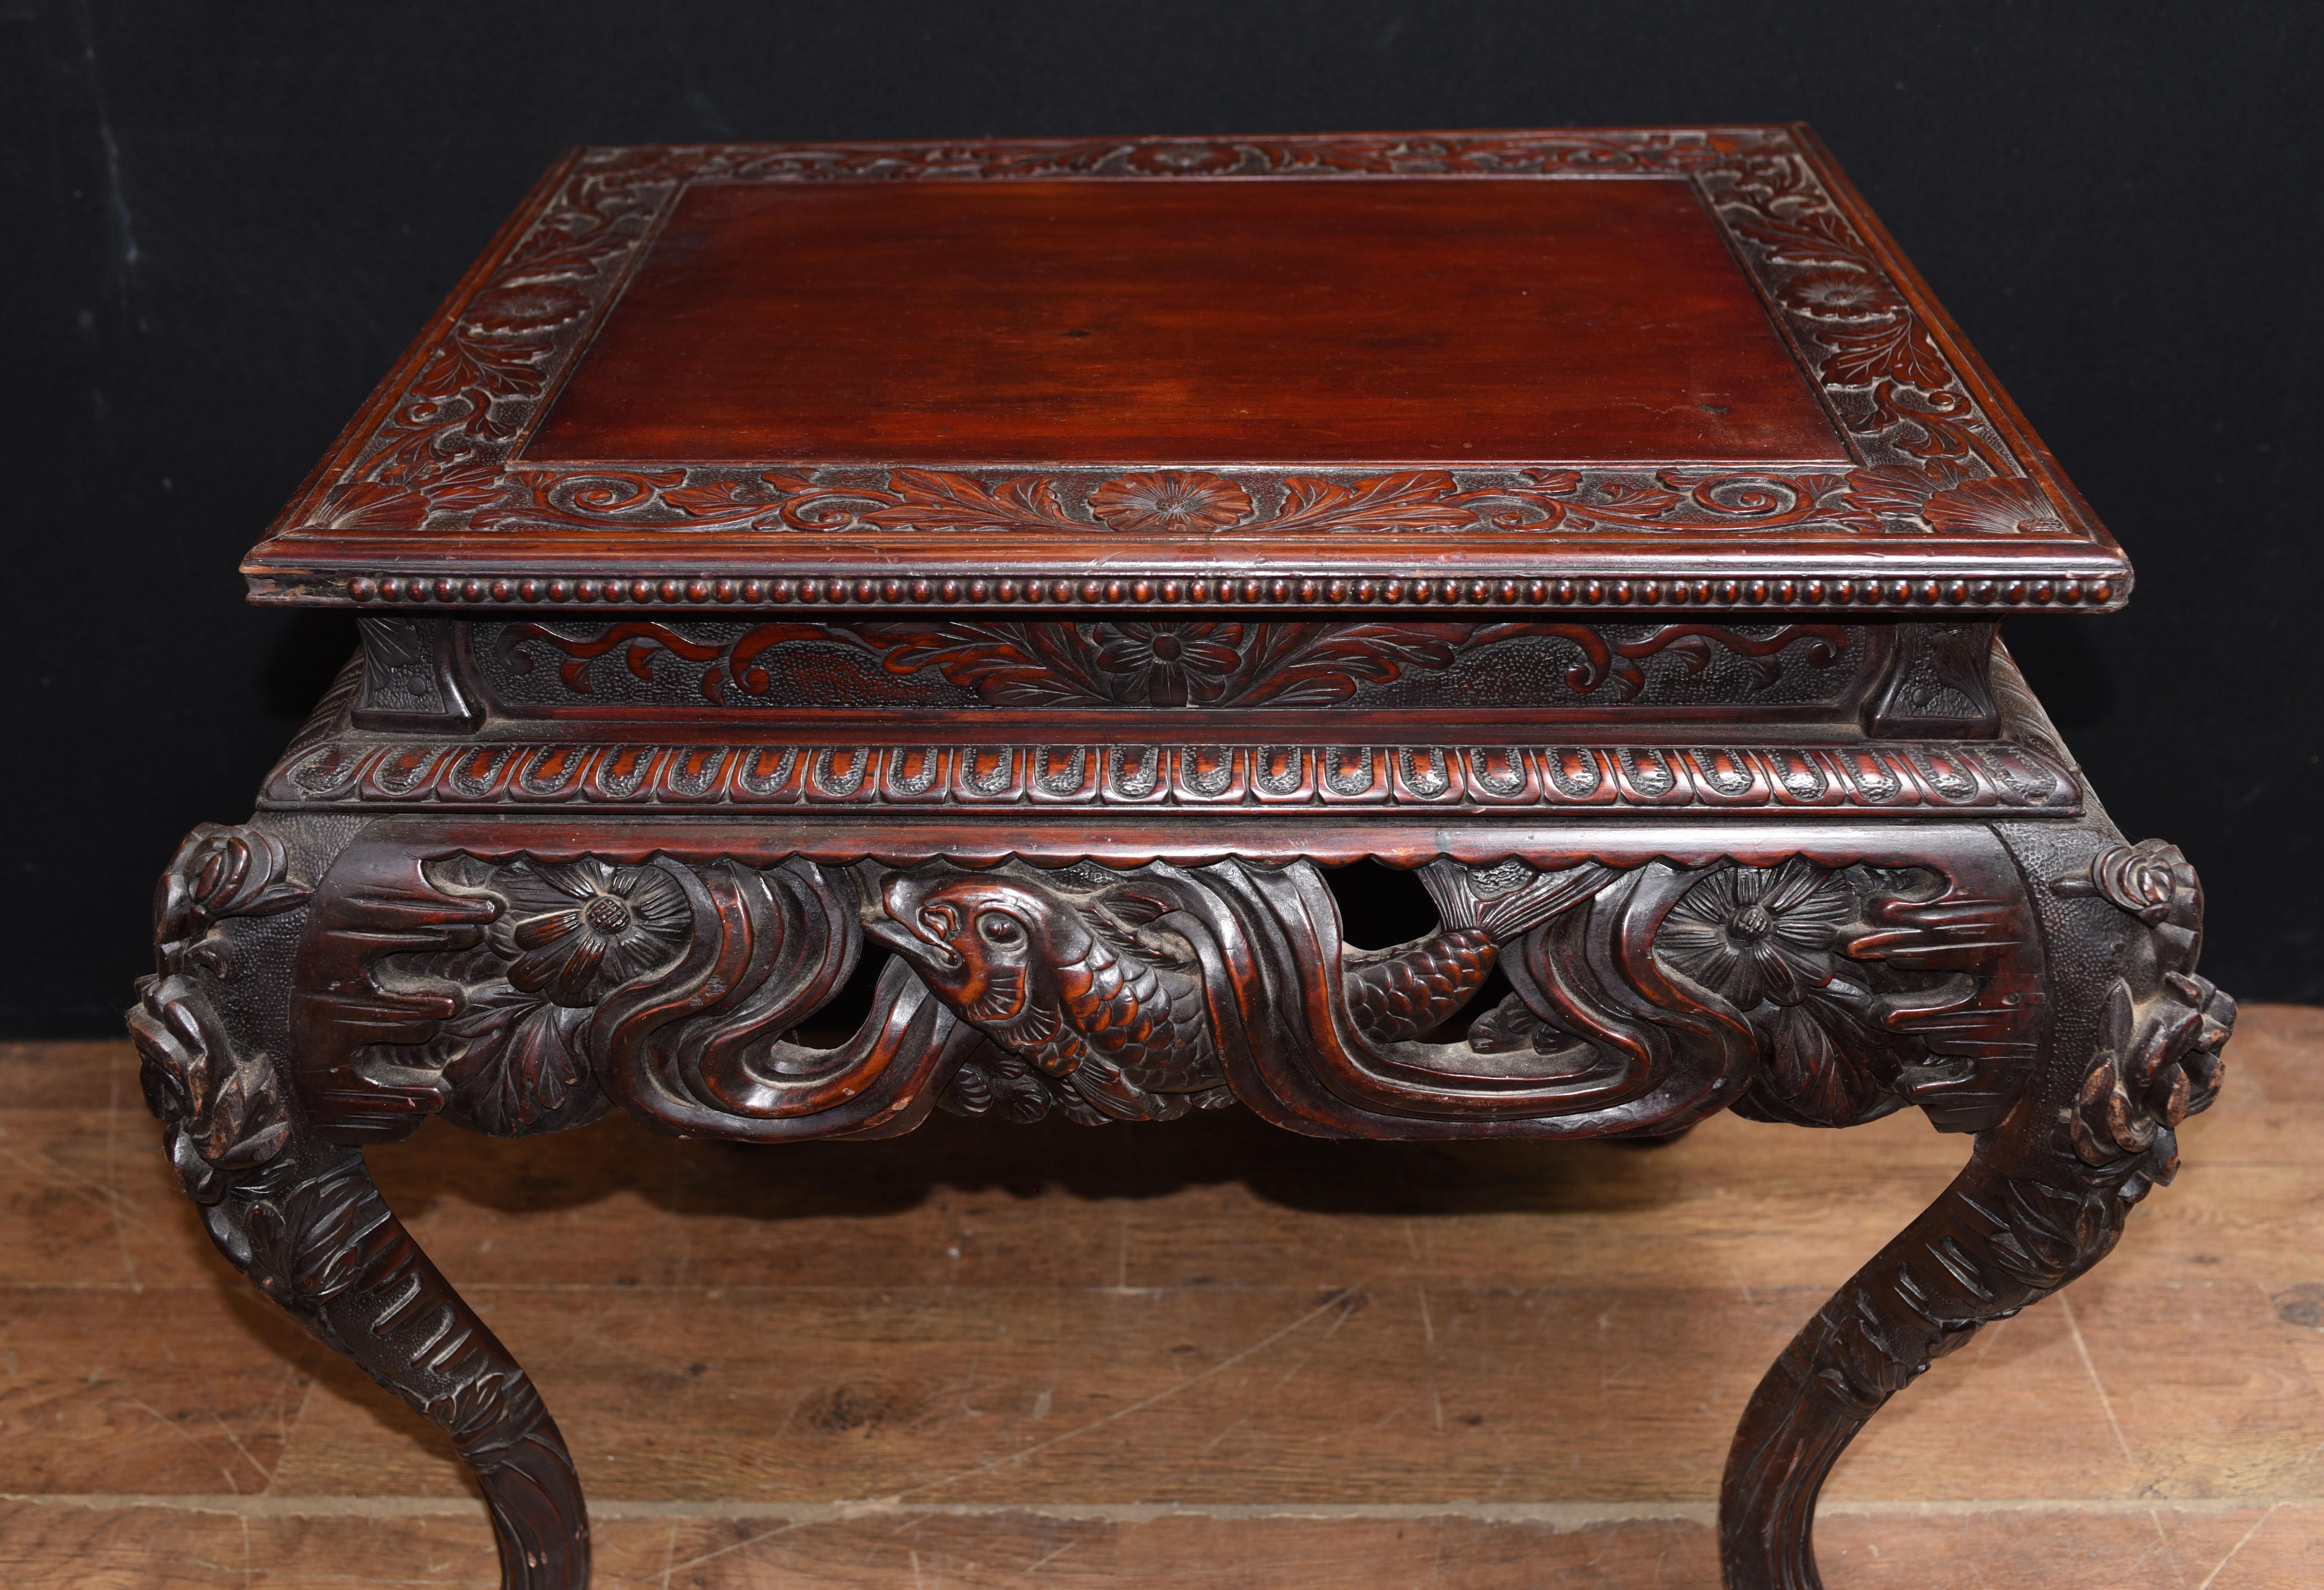 - Gorgeous hand carved antique antique Japanese side table
- We date this piece to circa 1920
- Hand carved from hardwood with amazingly intricate details
- Great collectors piece.
 